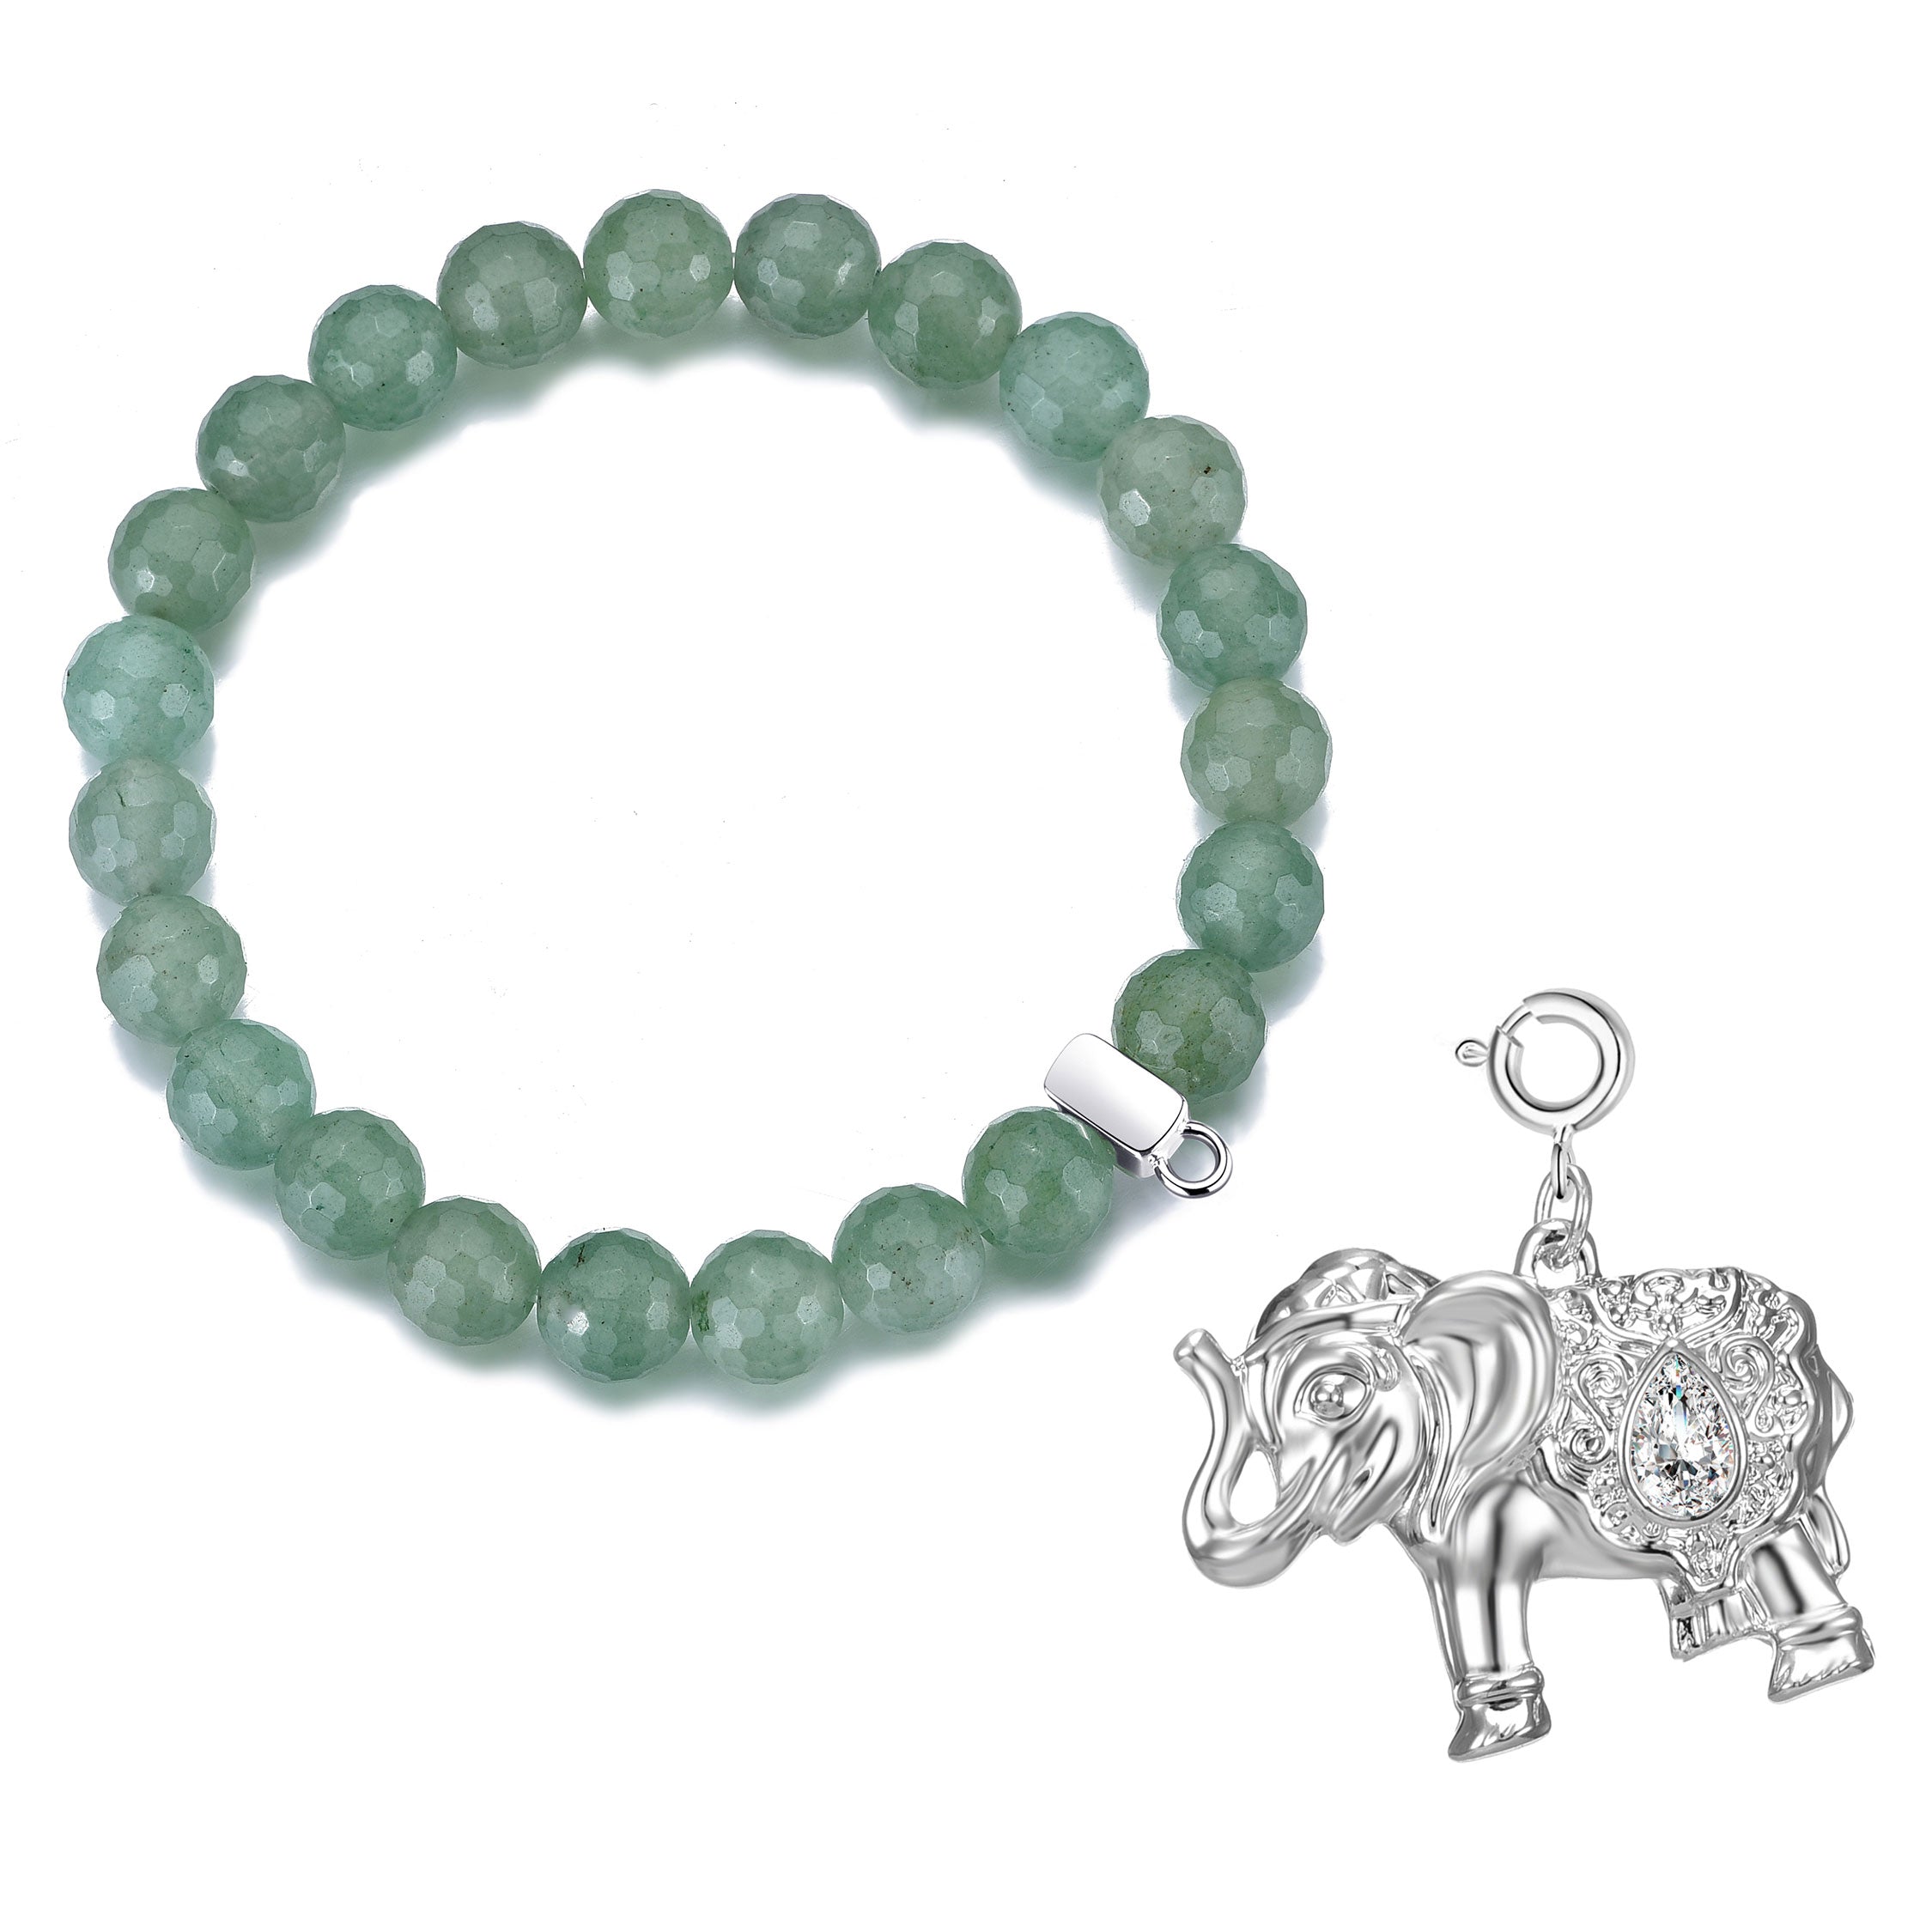 Faceted Green Aventurine Gemstone Stretch Bracelet with Charm Created with Zircondia® Crystals